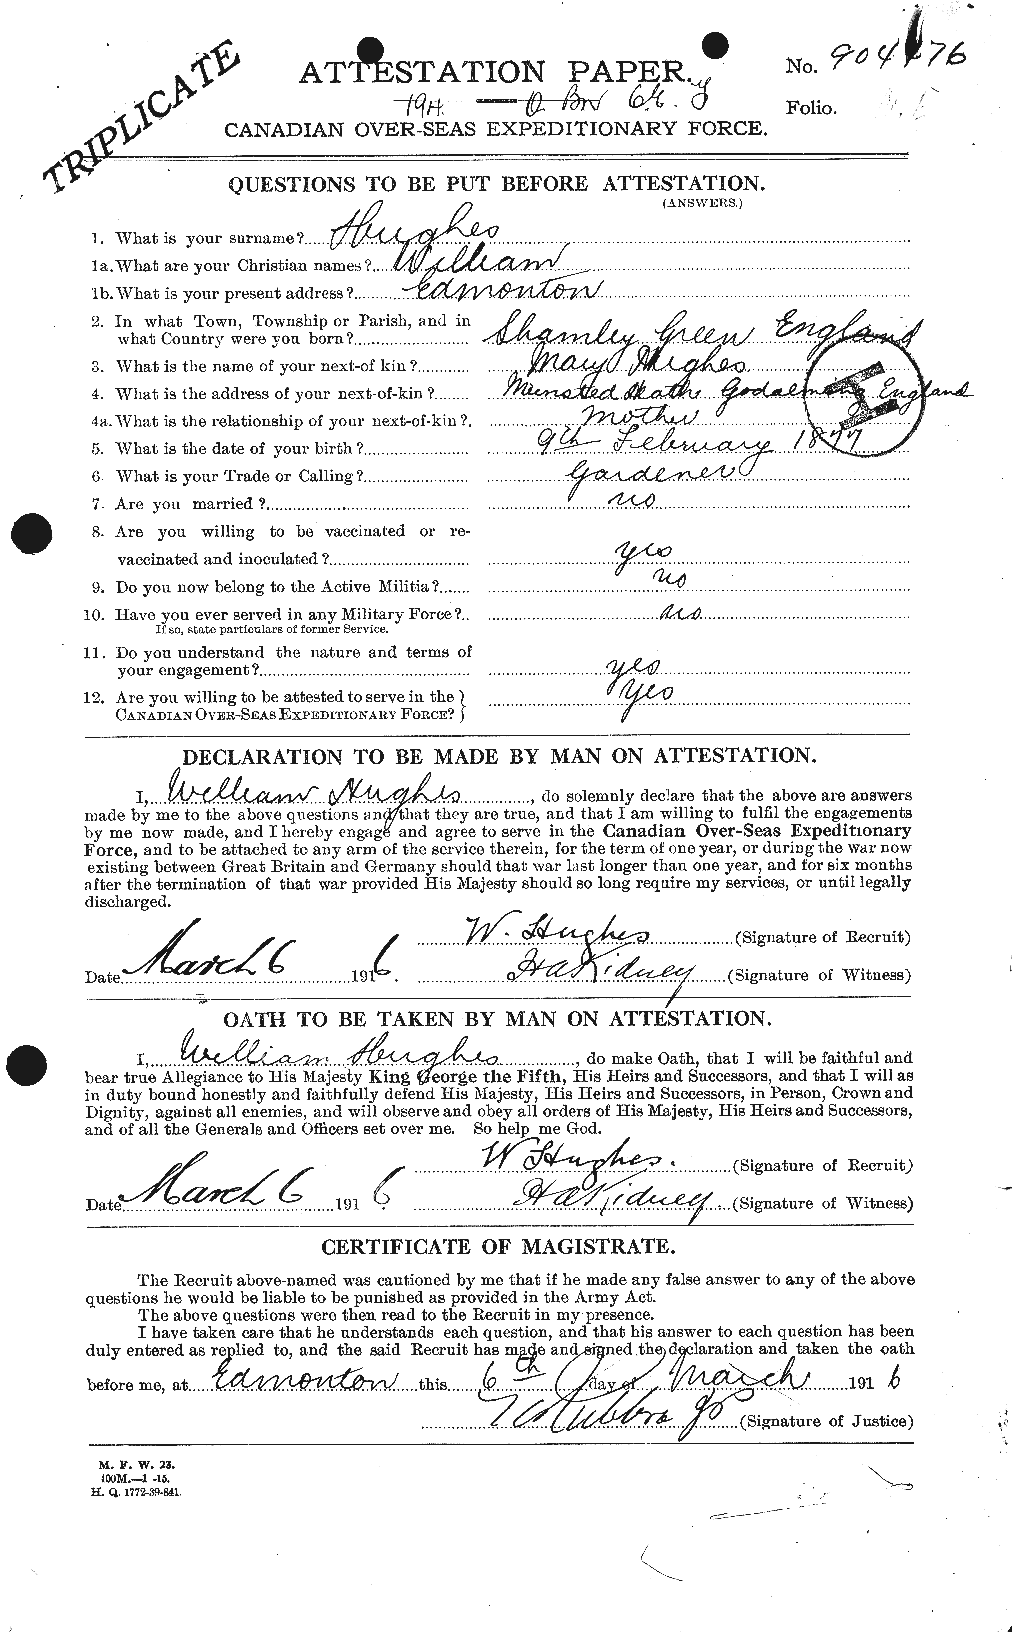 Personnel Records of the First World War - CEF 405893a